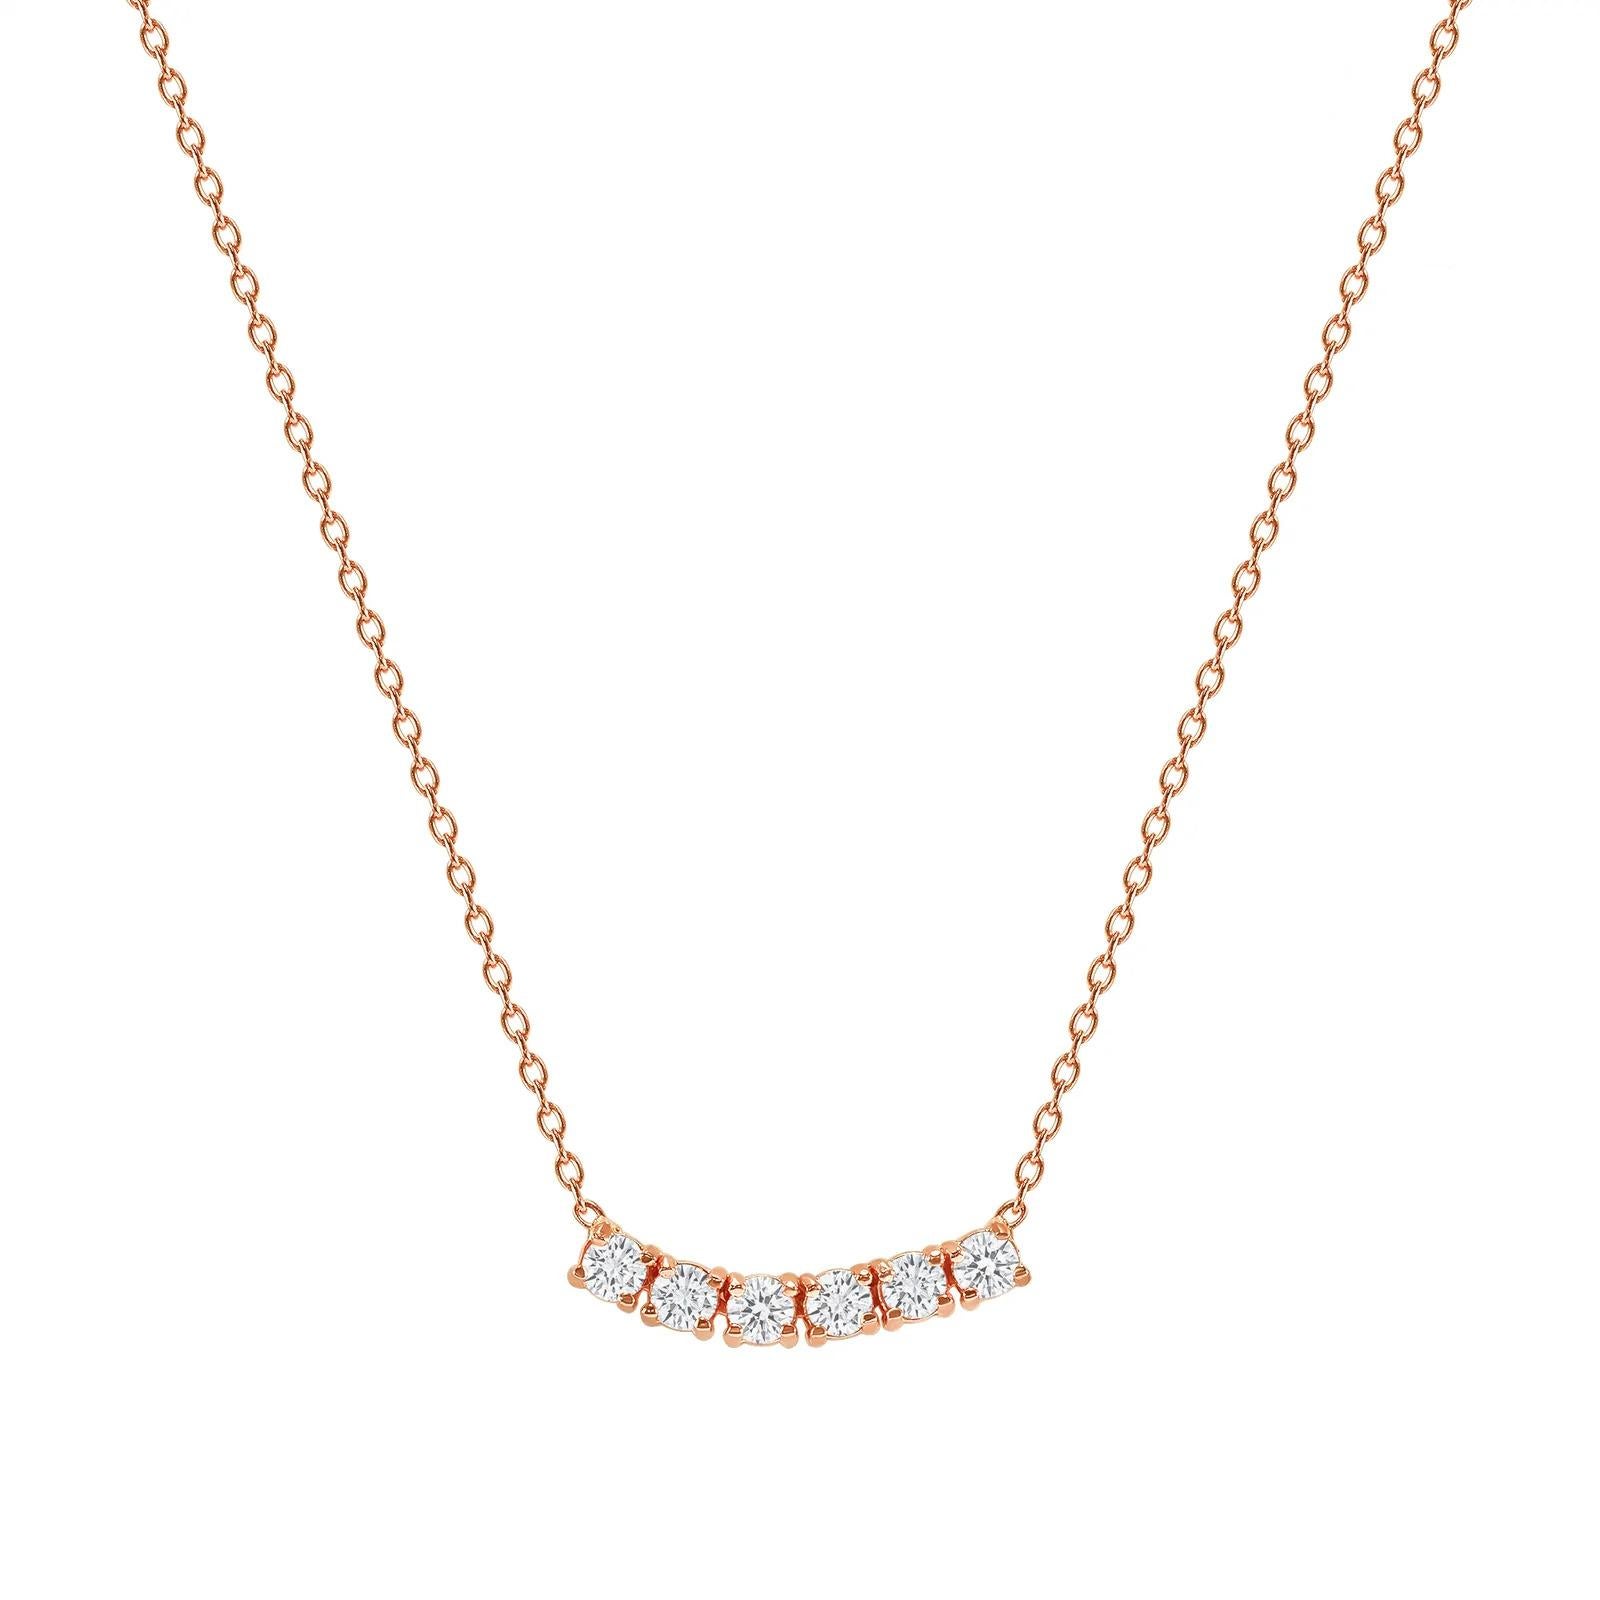 This petite, curved diamond necklace is crafted with gorgeous 14k gold set with six round diamonds.  

Gold: 14k 
Diamond Total Carats: 2 ct
Diamond Cut: Round (6 diamonds)
Diamond Clarity: VS
Diamond Color: F
Color: Rose Gold
Necklace Length: 16